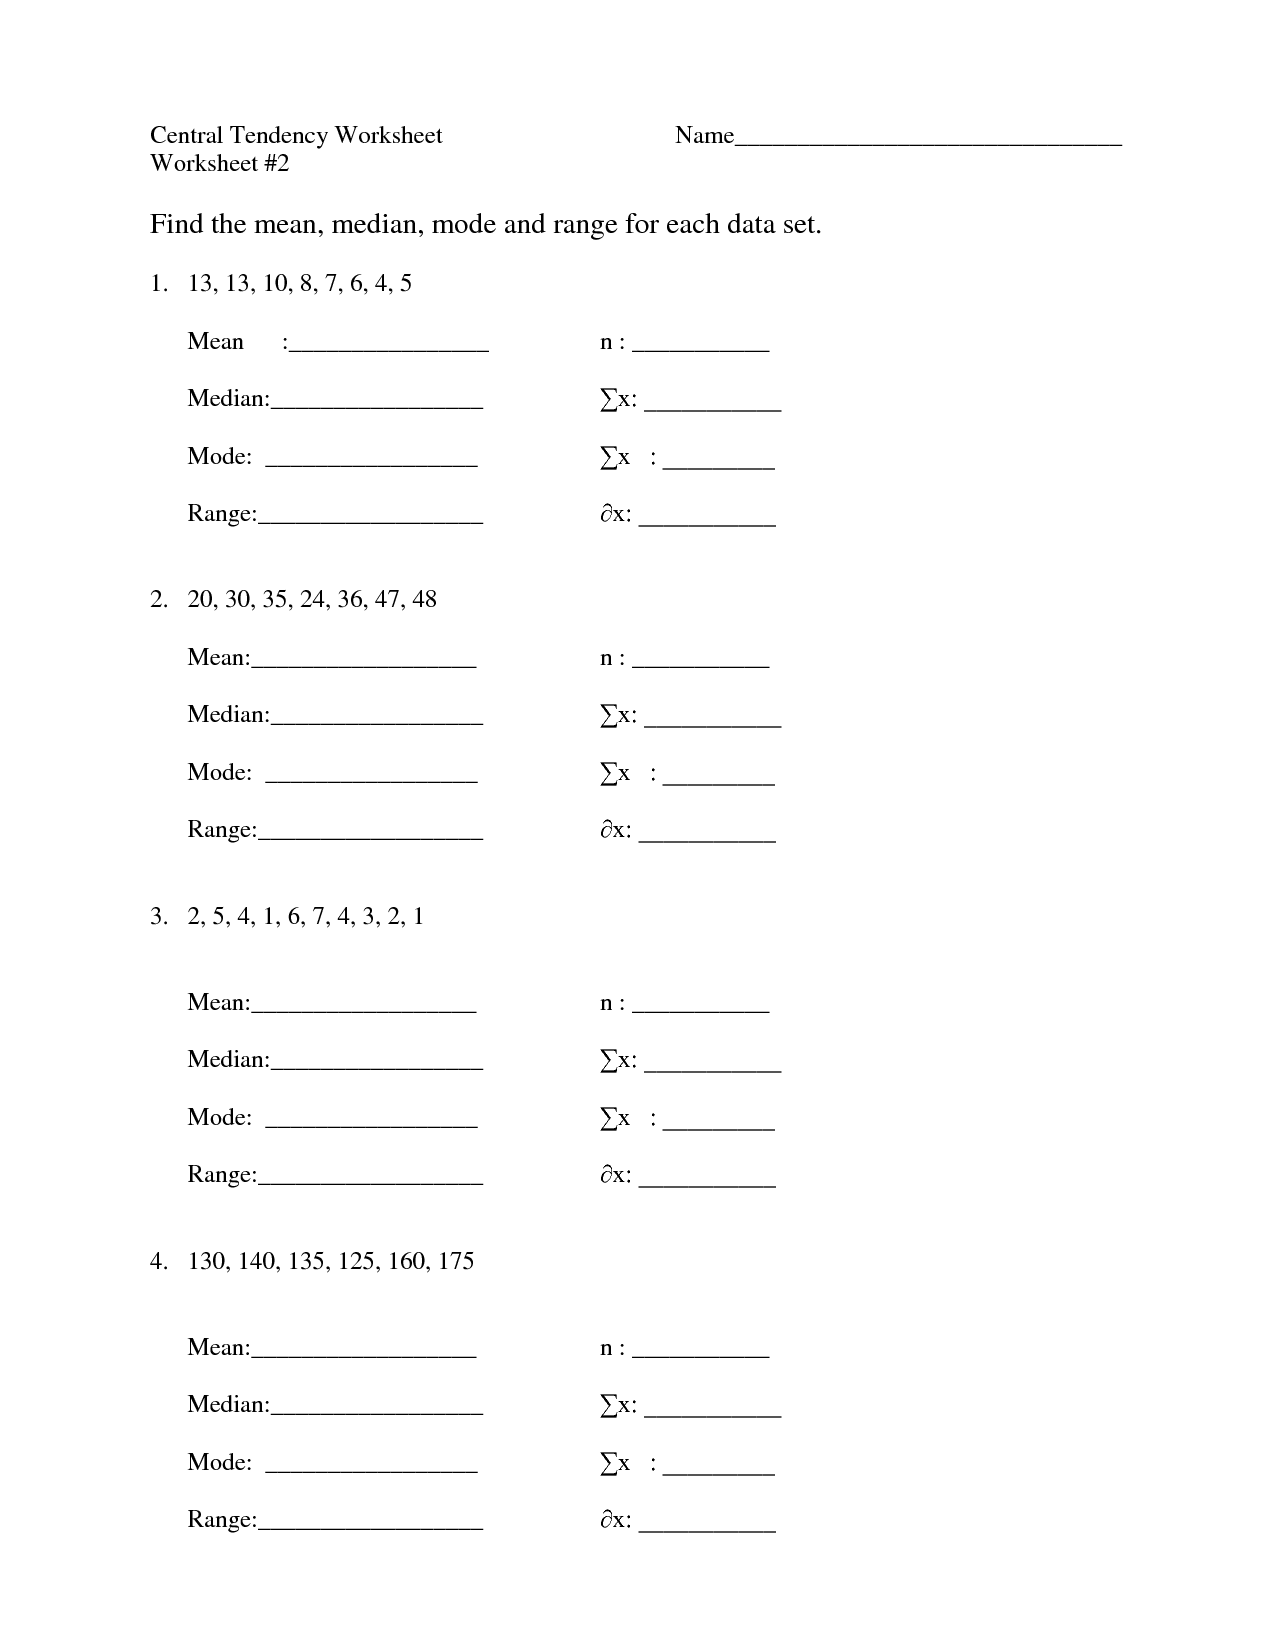 Central Tendency Worksheets 8th Grade